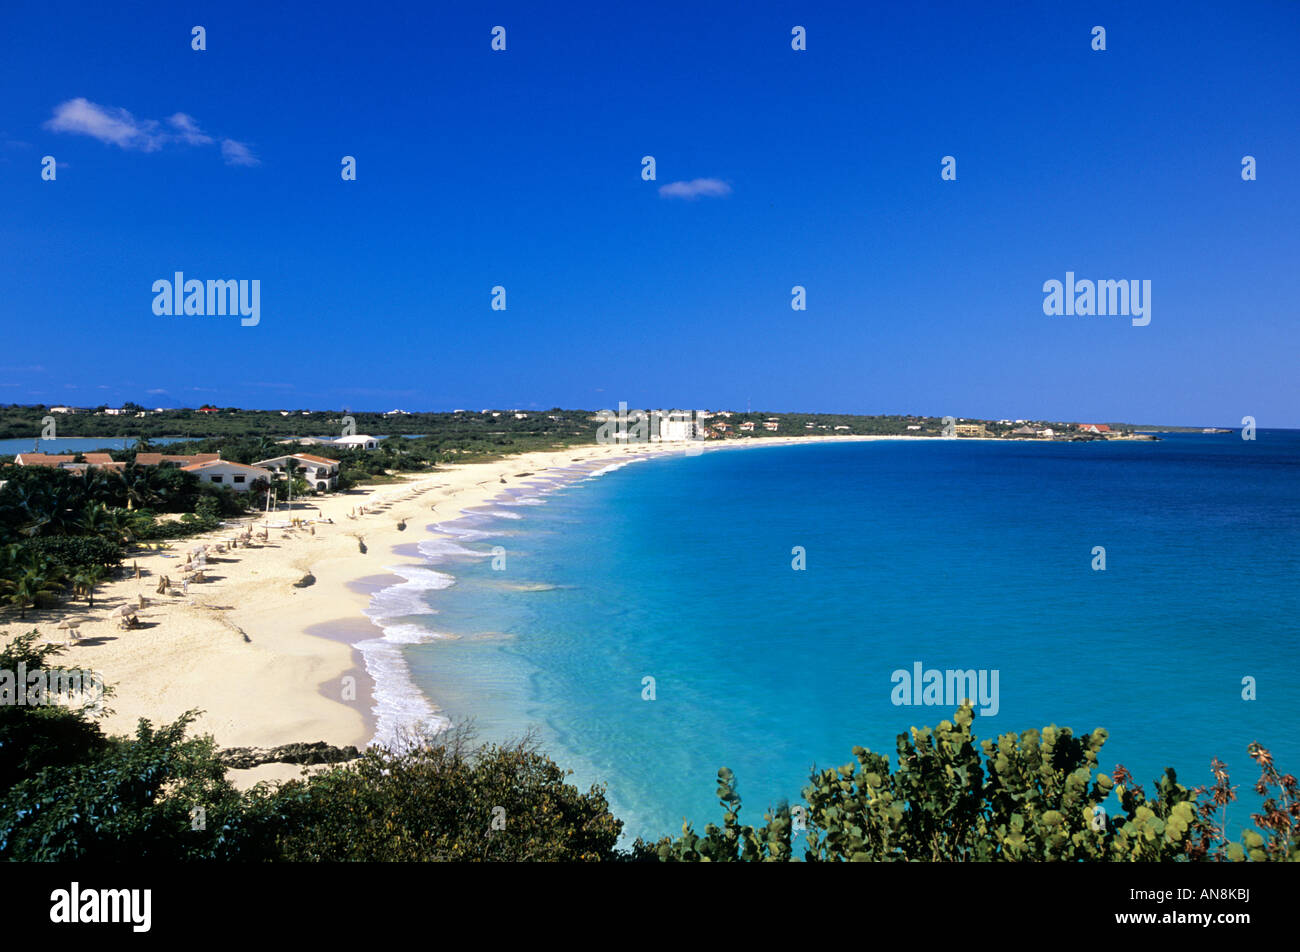 Mead's Bay Beach Anguilla Banque D'Images